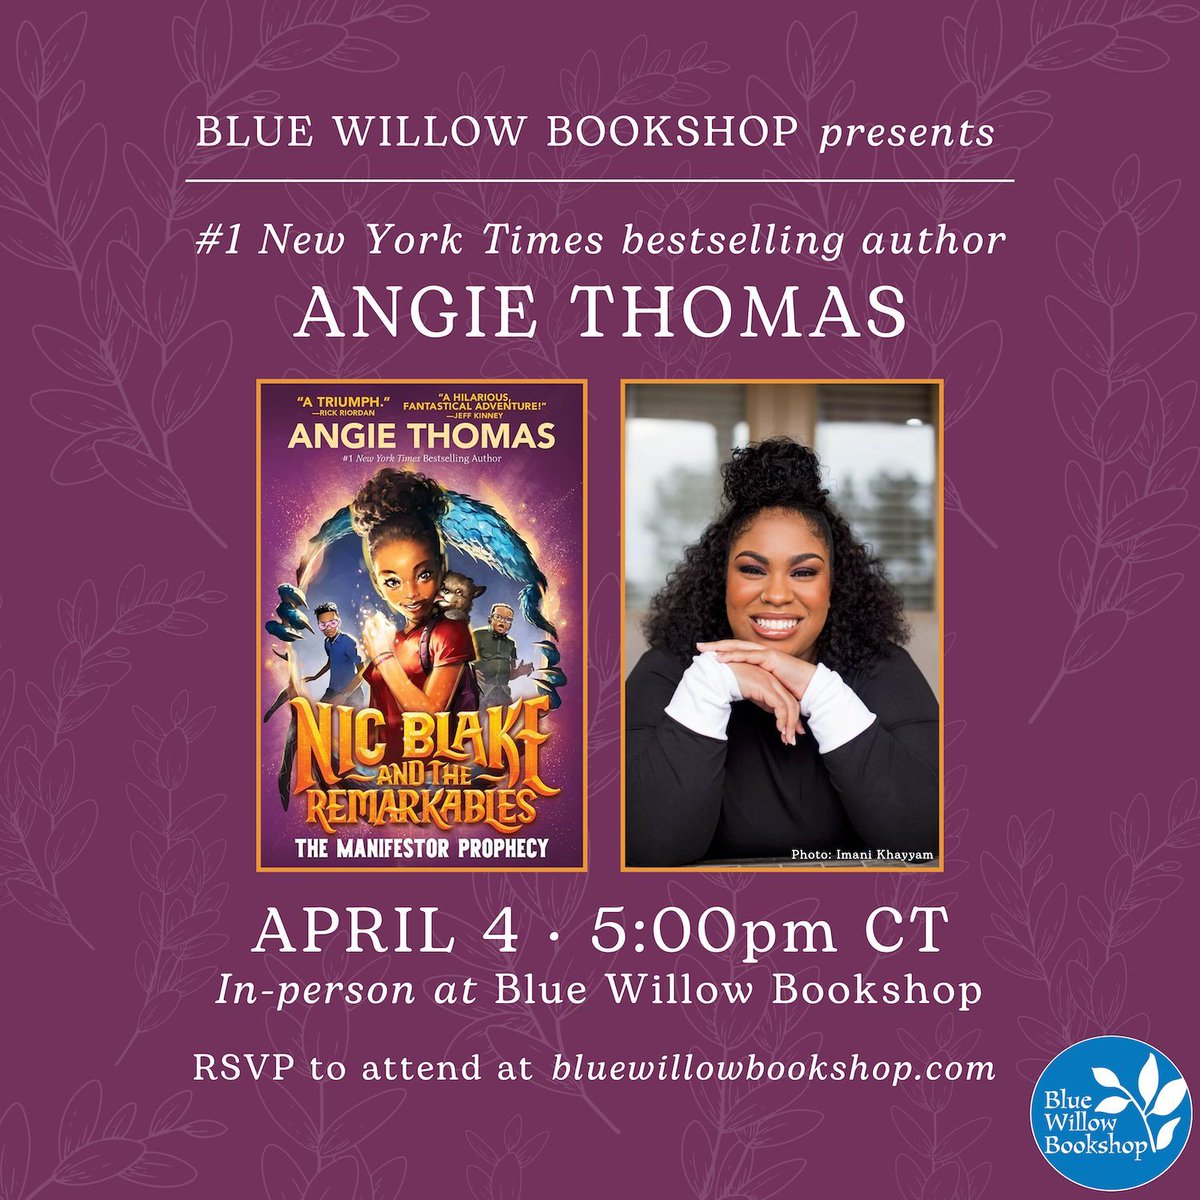 📣 Very exciting event announcement! #1 NYT bestselling superstar author @angiecthomas is coming to the bookshop to celebrate her magical #mglit debut, NIC BLAKE AND THE REMARKABLES! 💫 Don't miss it, friends! bluewillowbookshop.com/event/thomas-2… #Houston @HarperChildrens